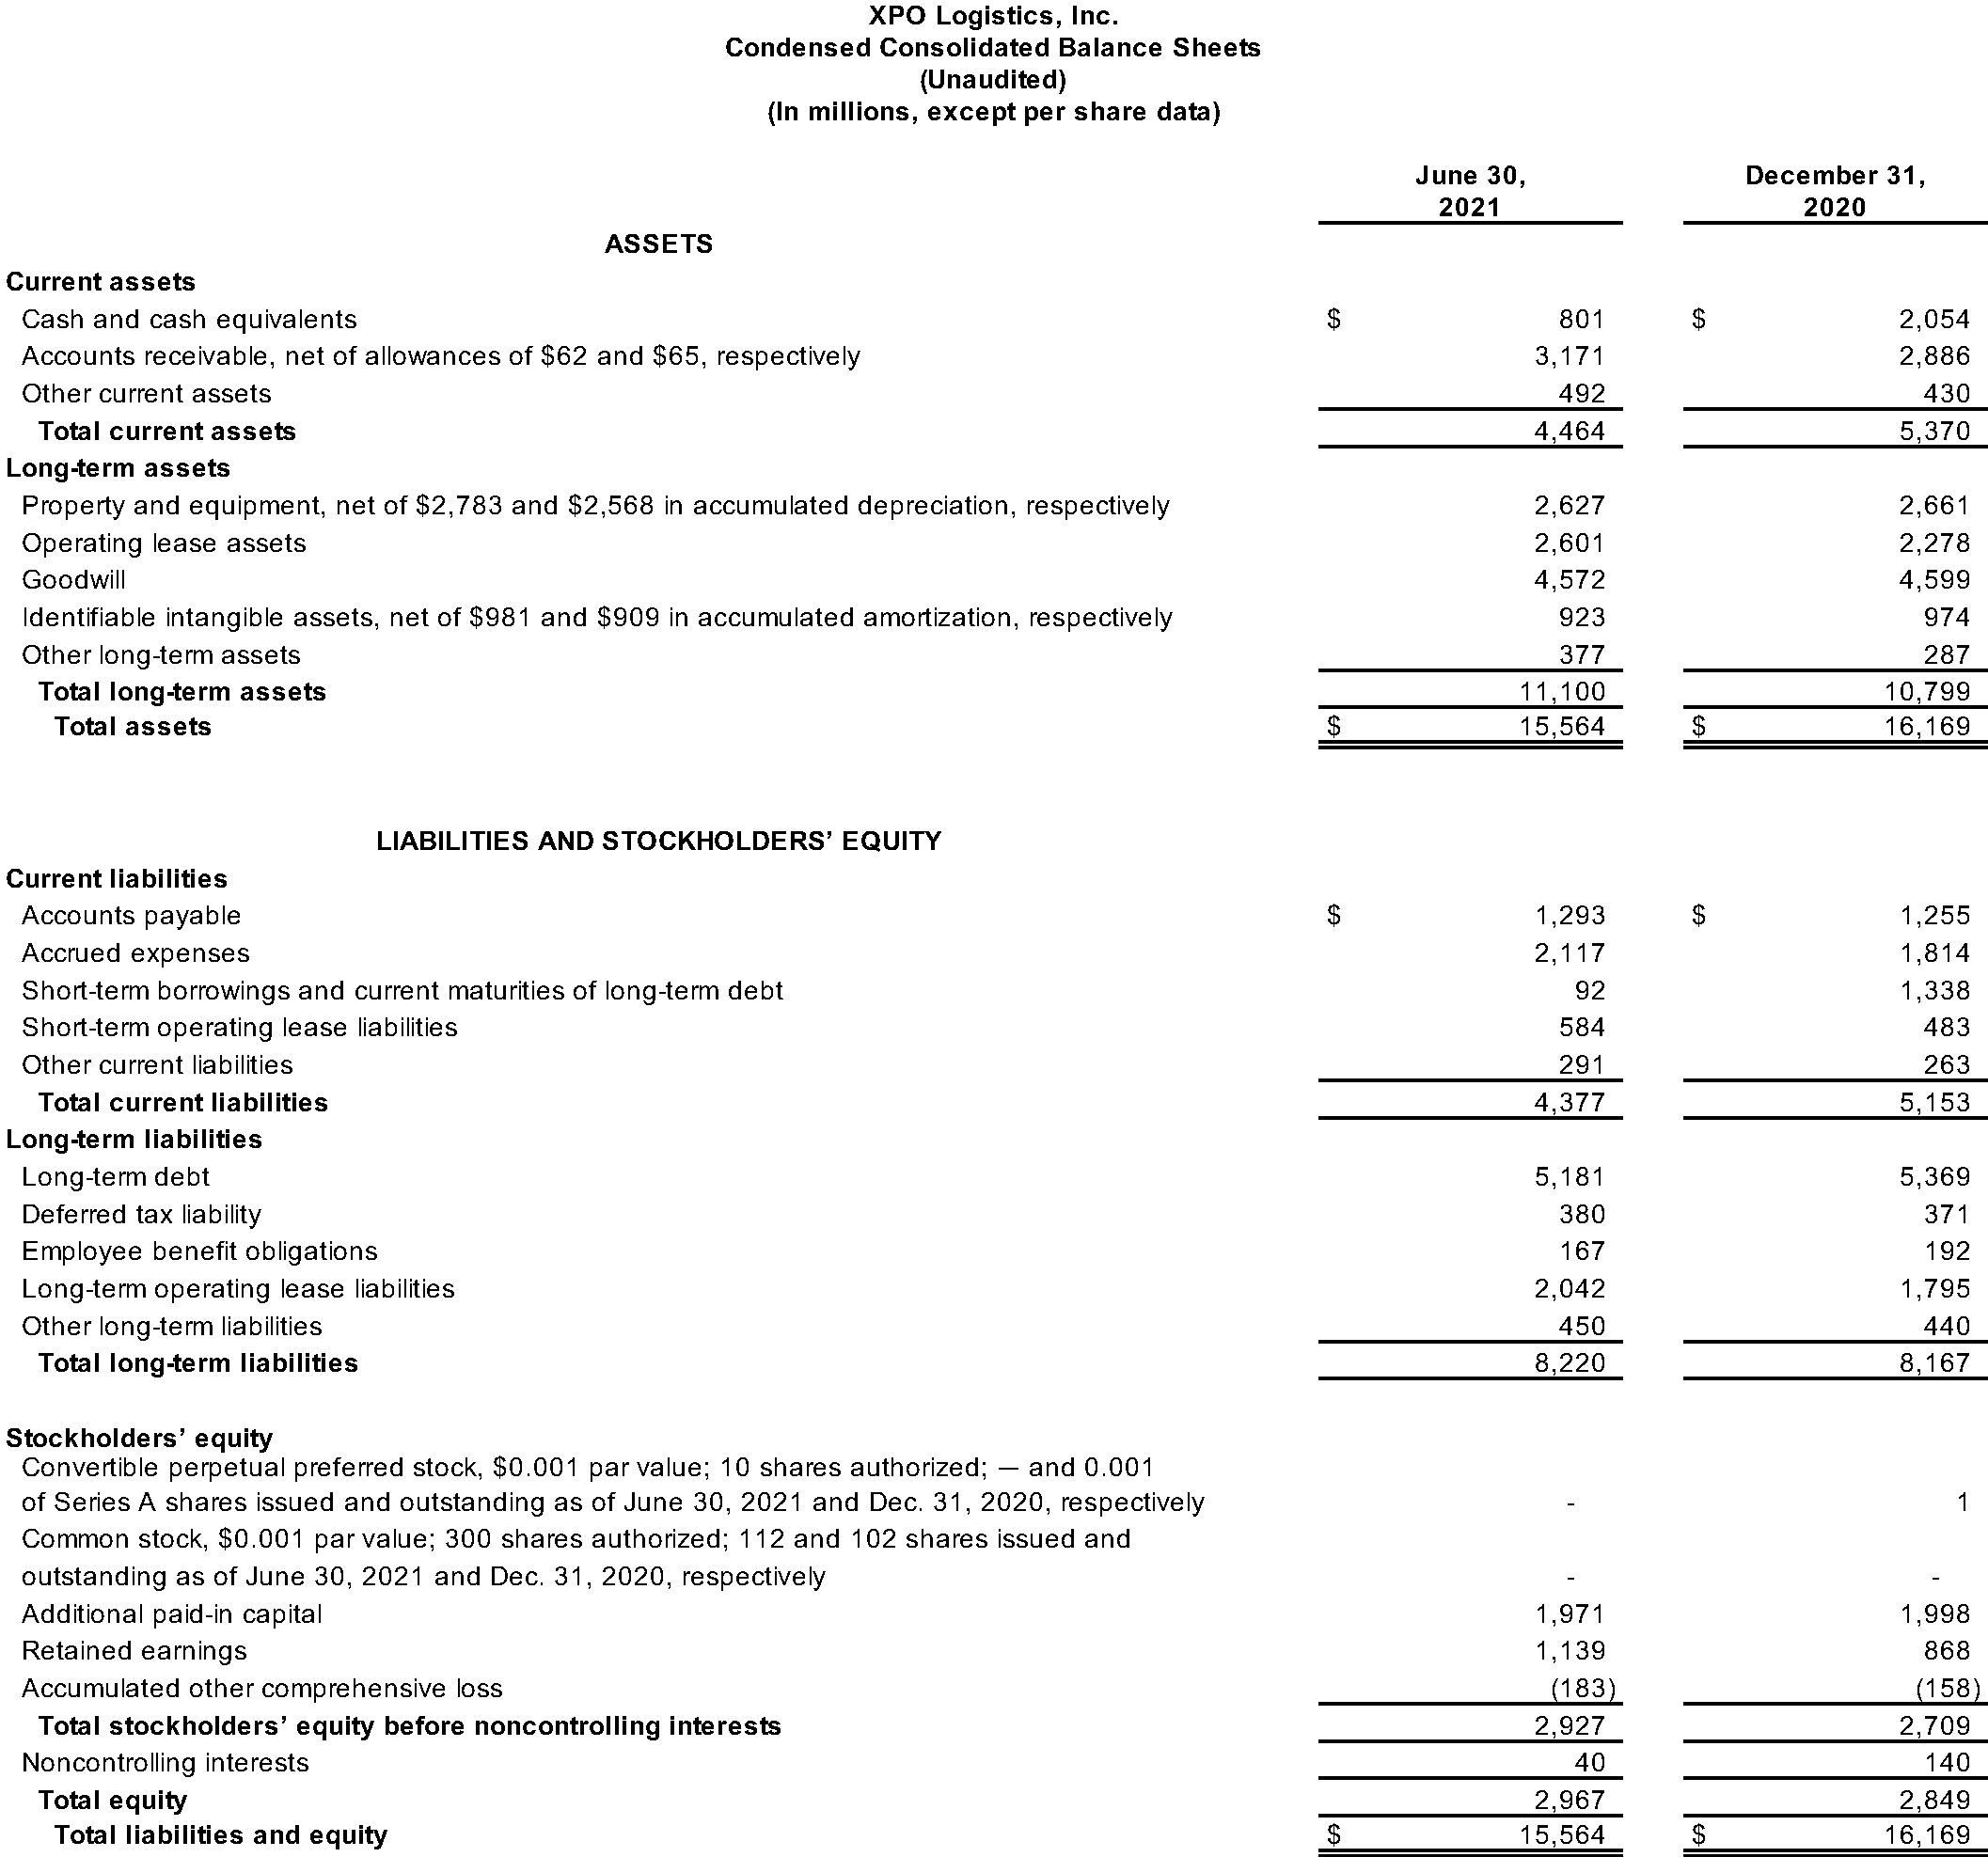 Condensed Consolidated Balance Sheets (Unaudited)